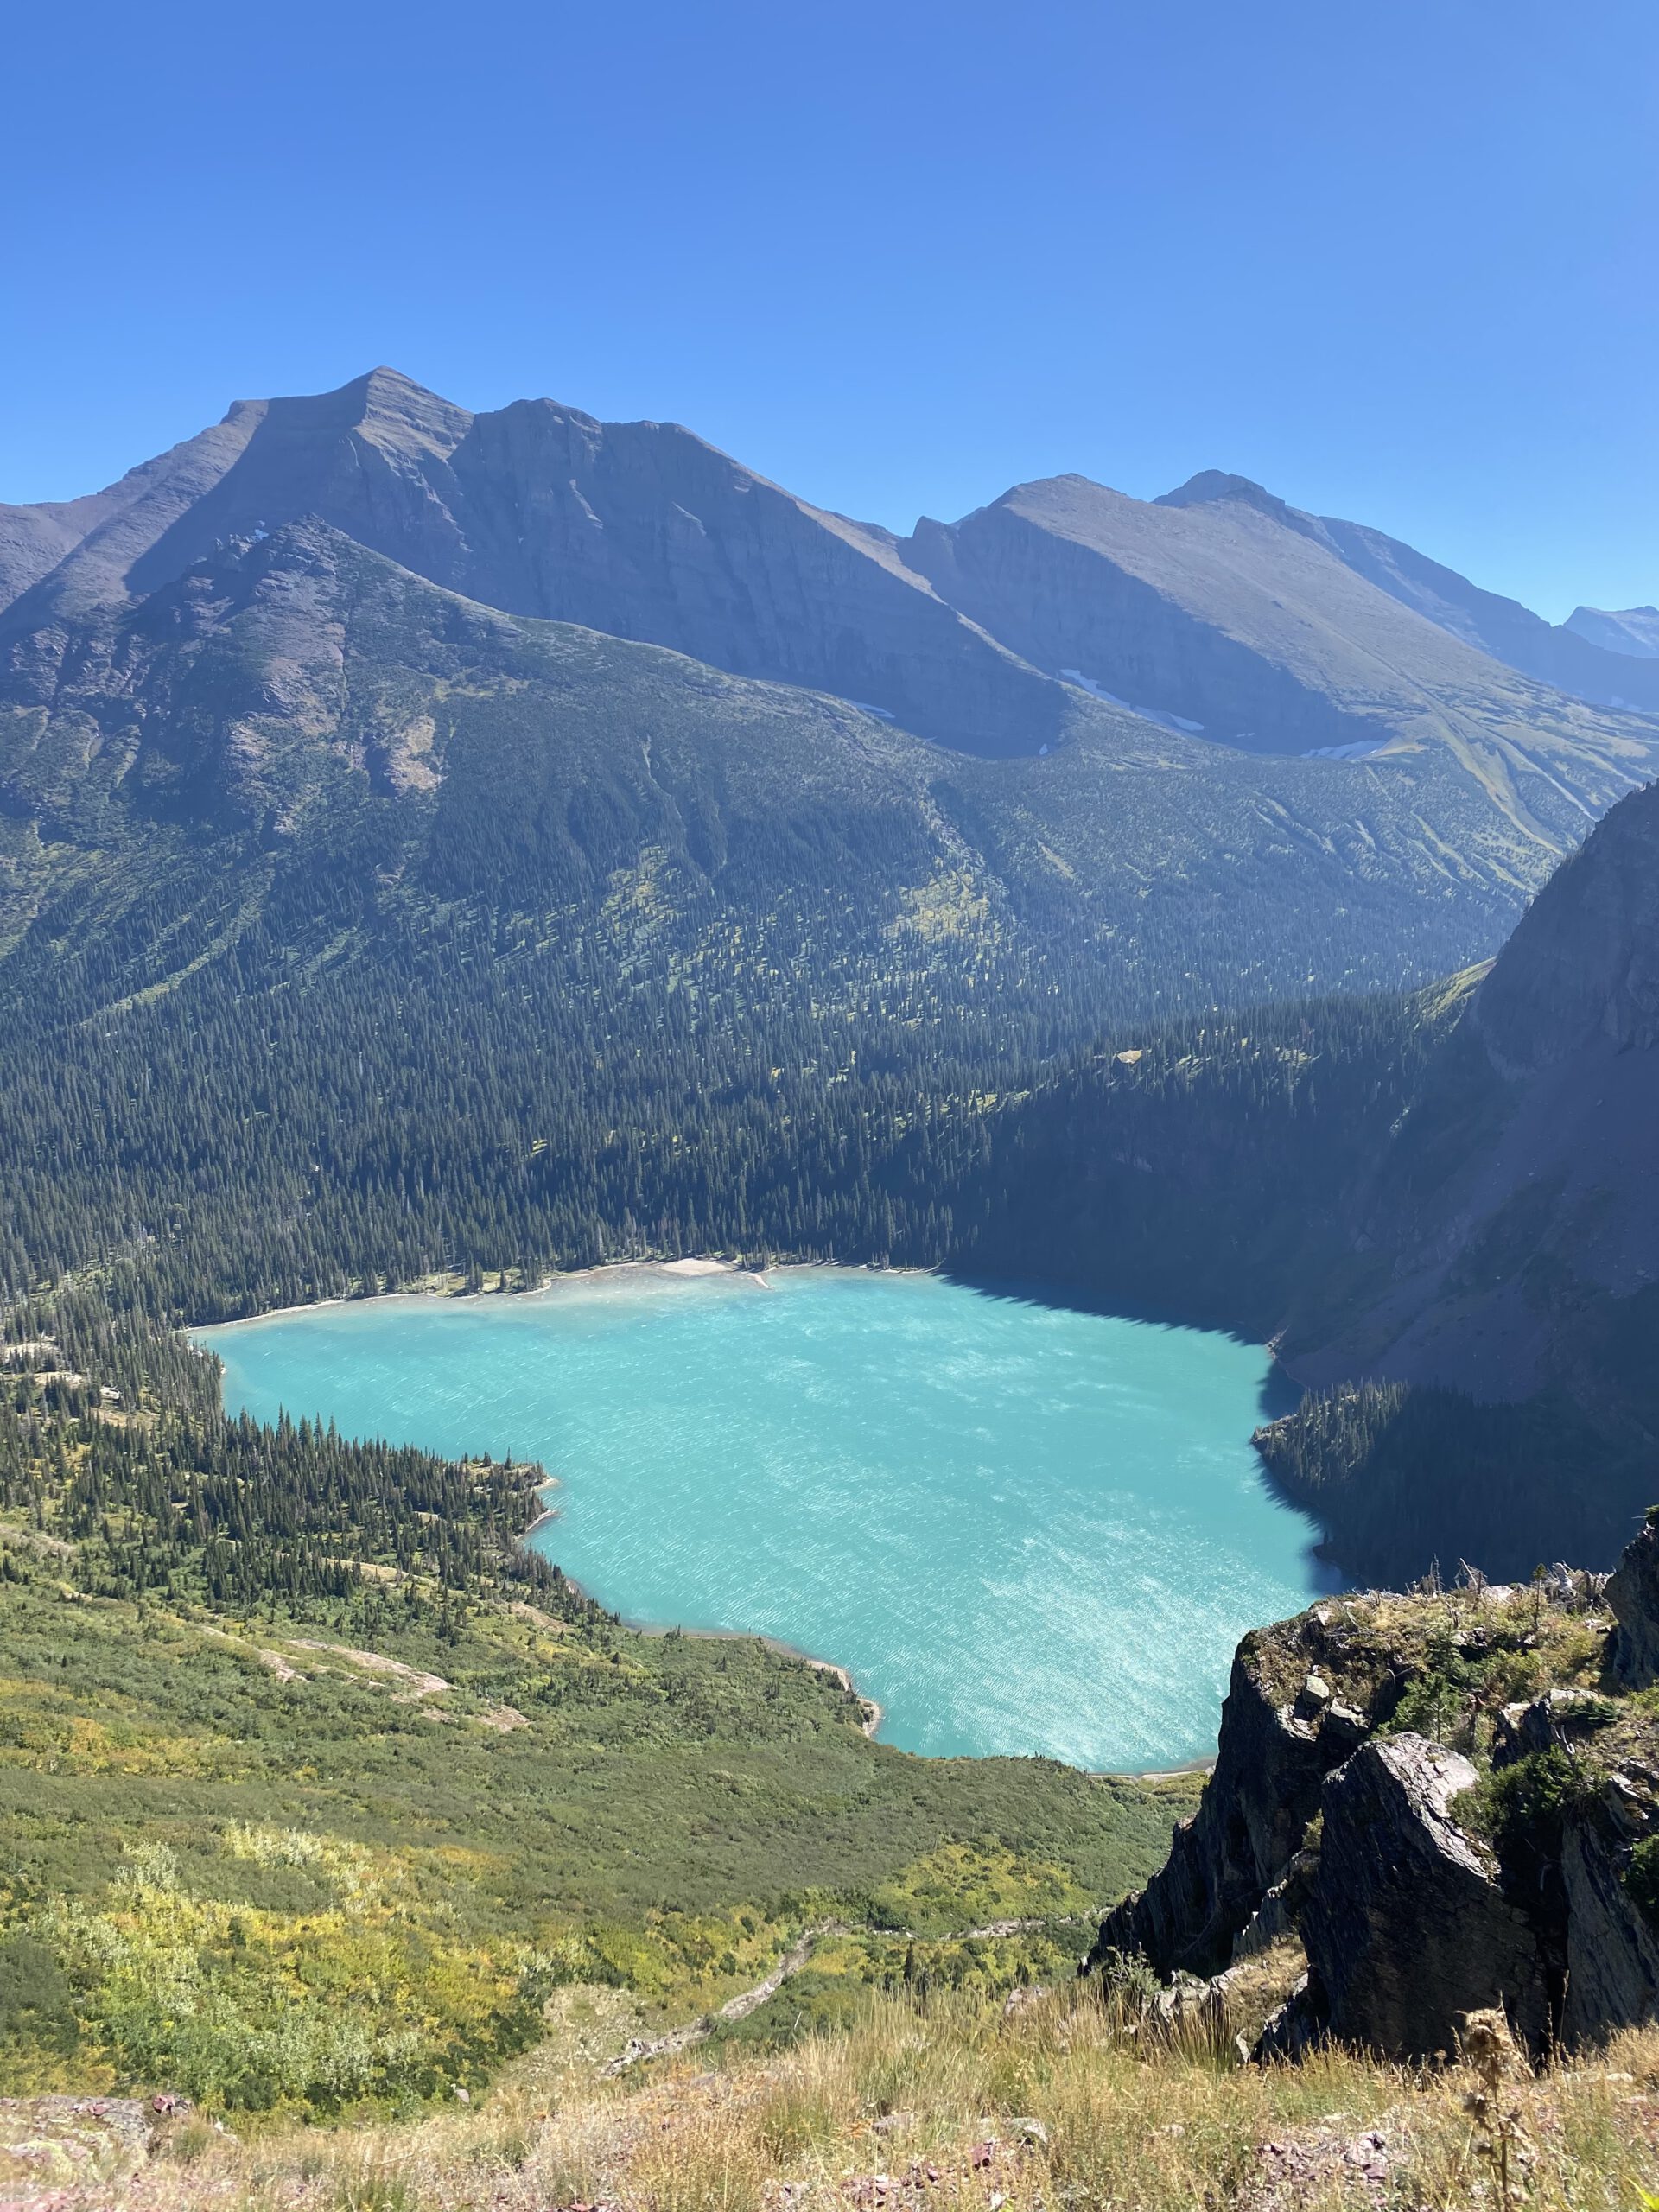 View of Grinnell Lake while on the Grinnell Glacier trail 